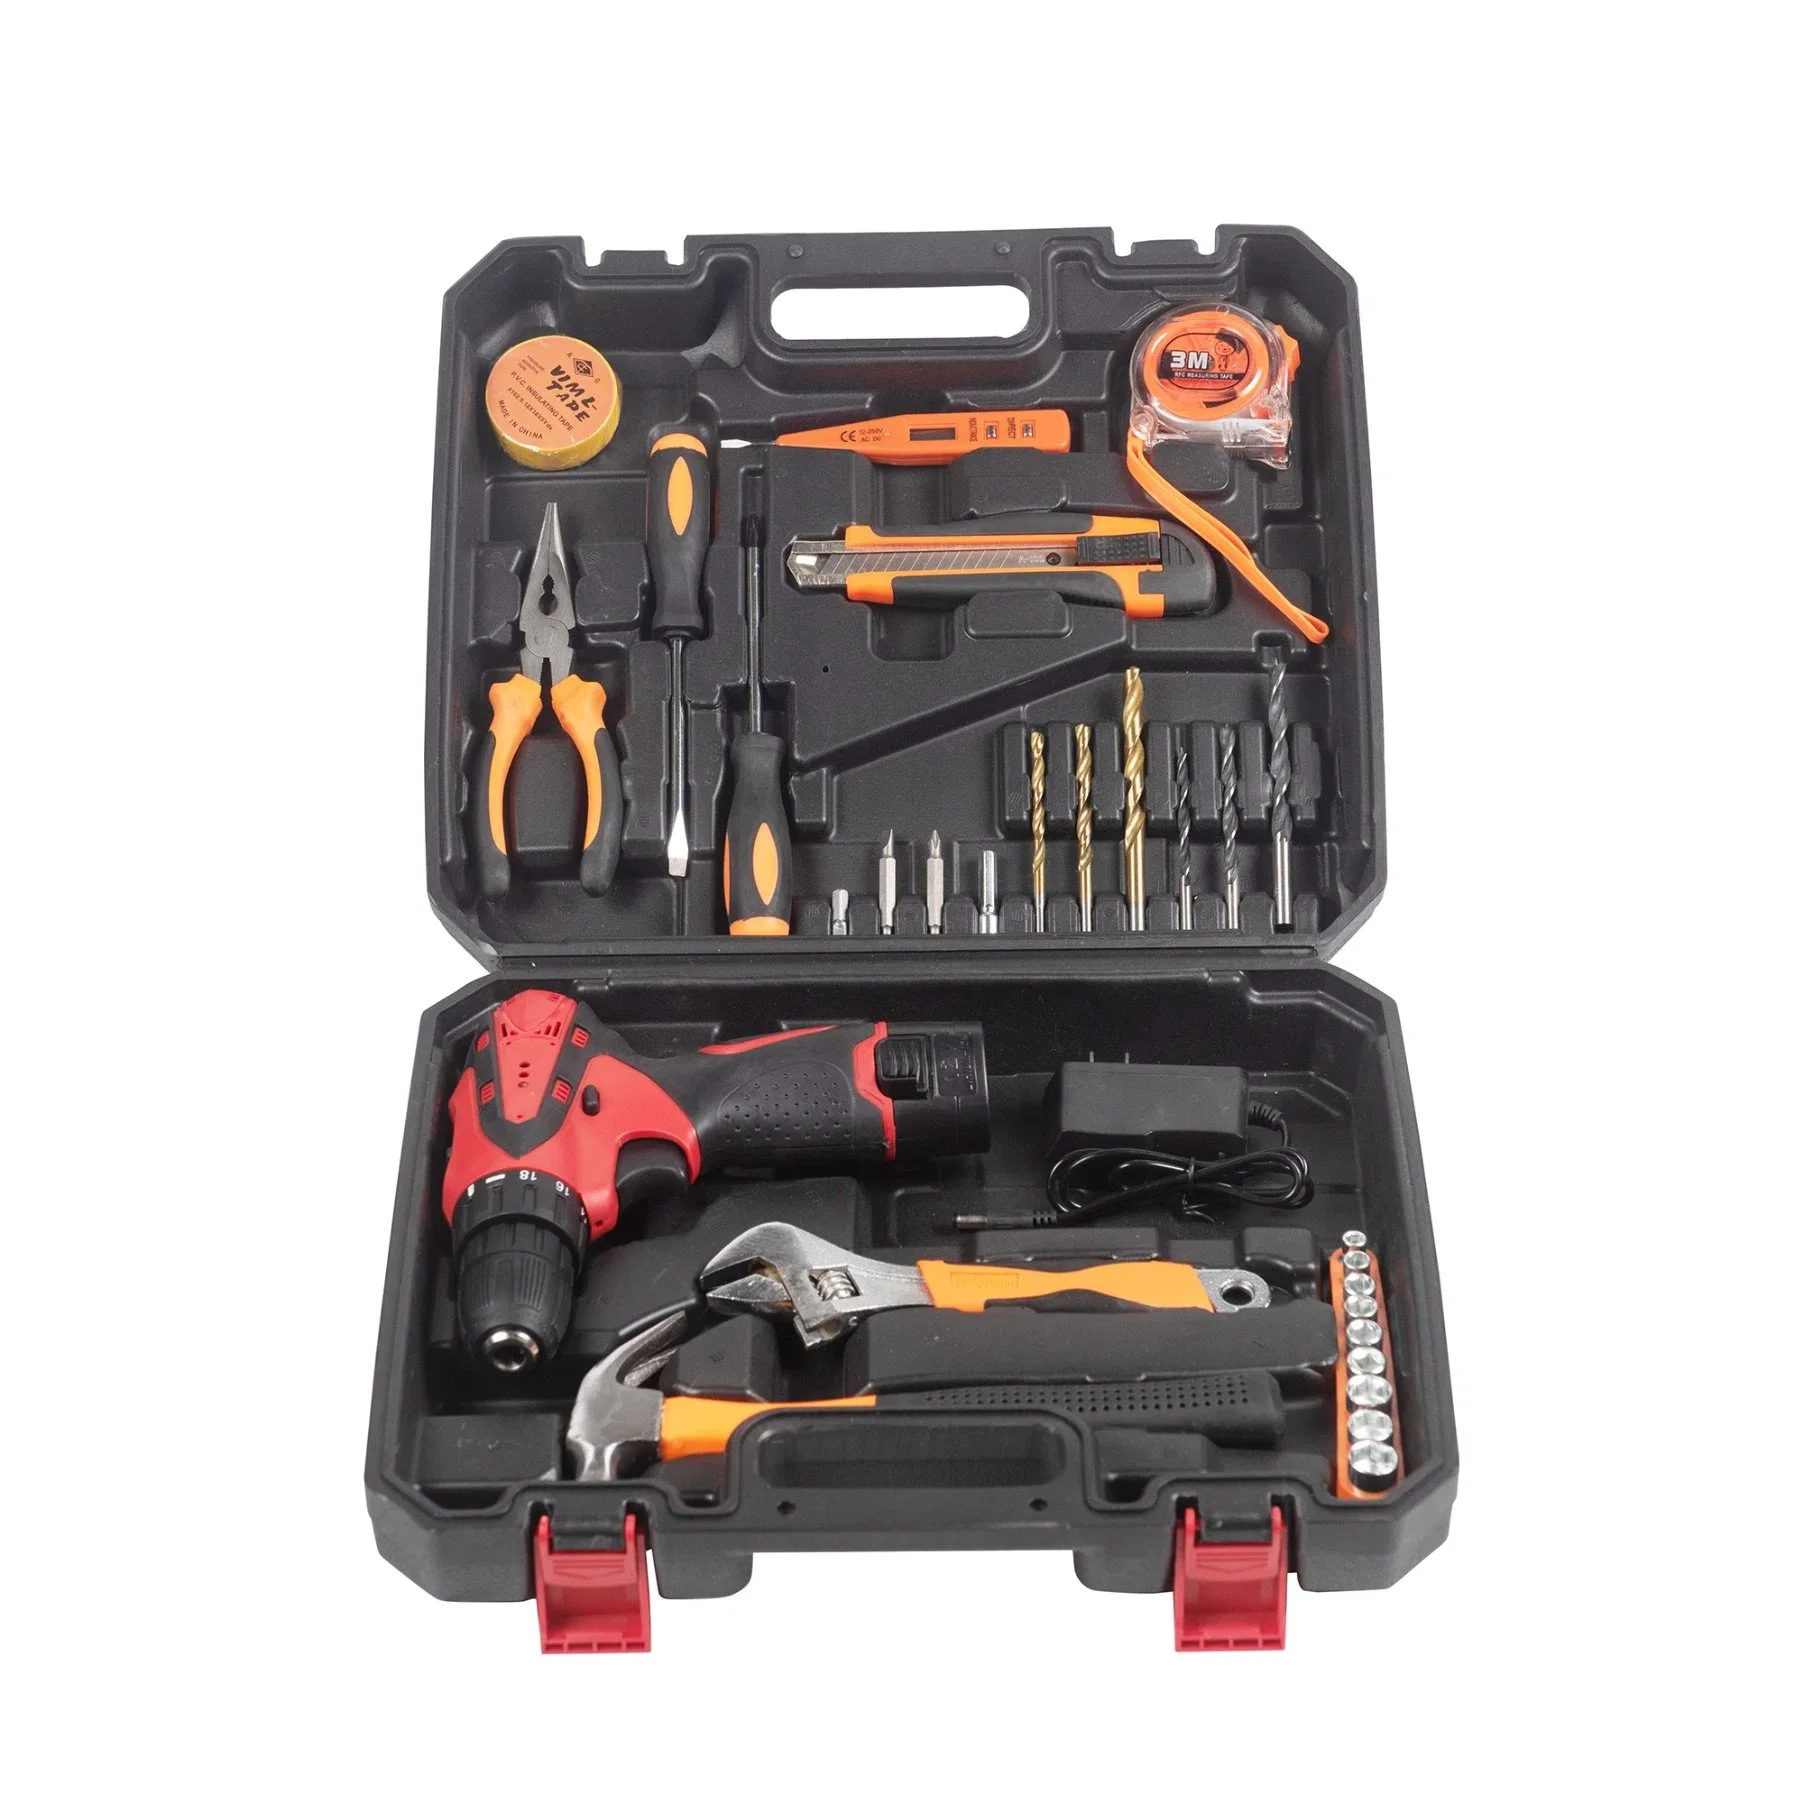 Tool Kit for Home Portable Household Repairing Electrician Hardware Hand Tool Set Electric Toolbox Tool Set